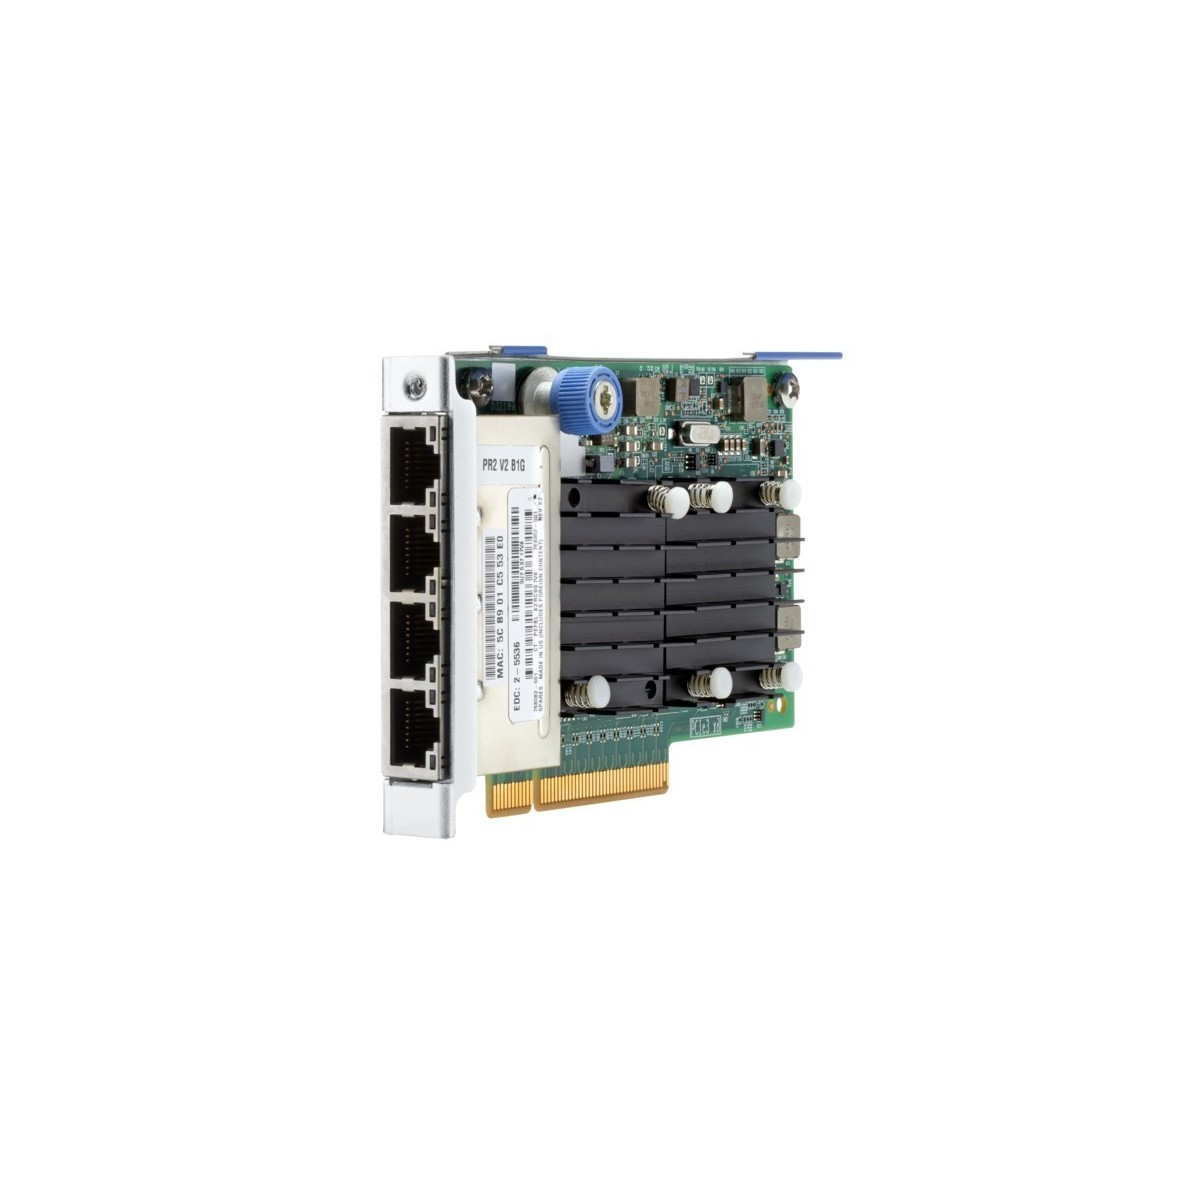 HPE 764302-B21 - Internal - Wired - PCI Express - Ethernet